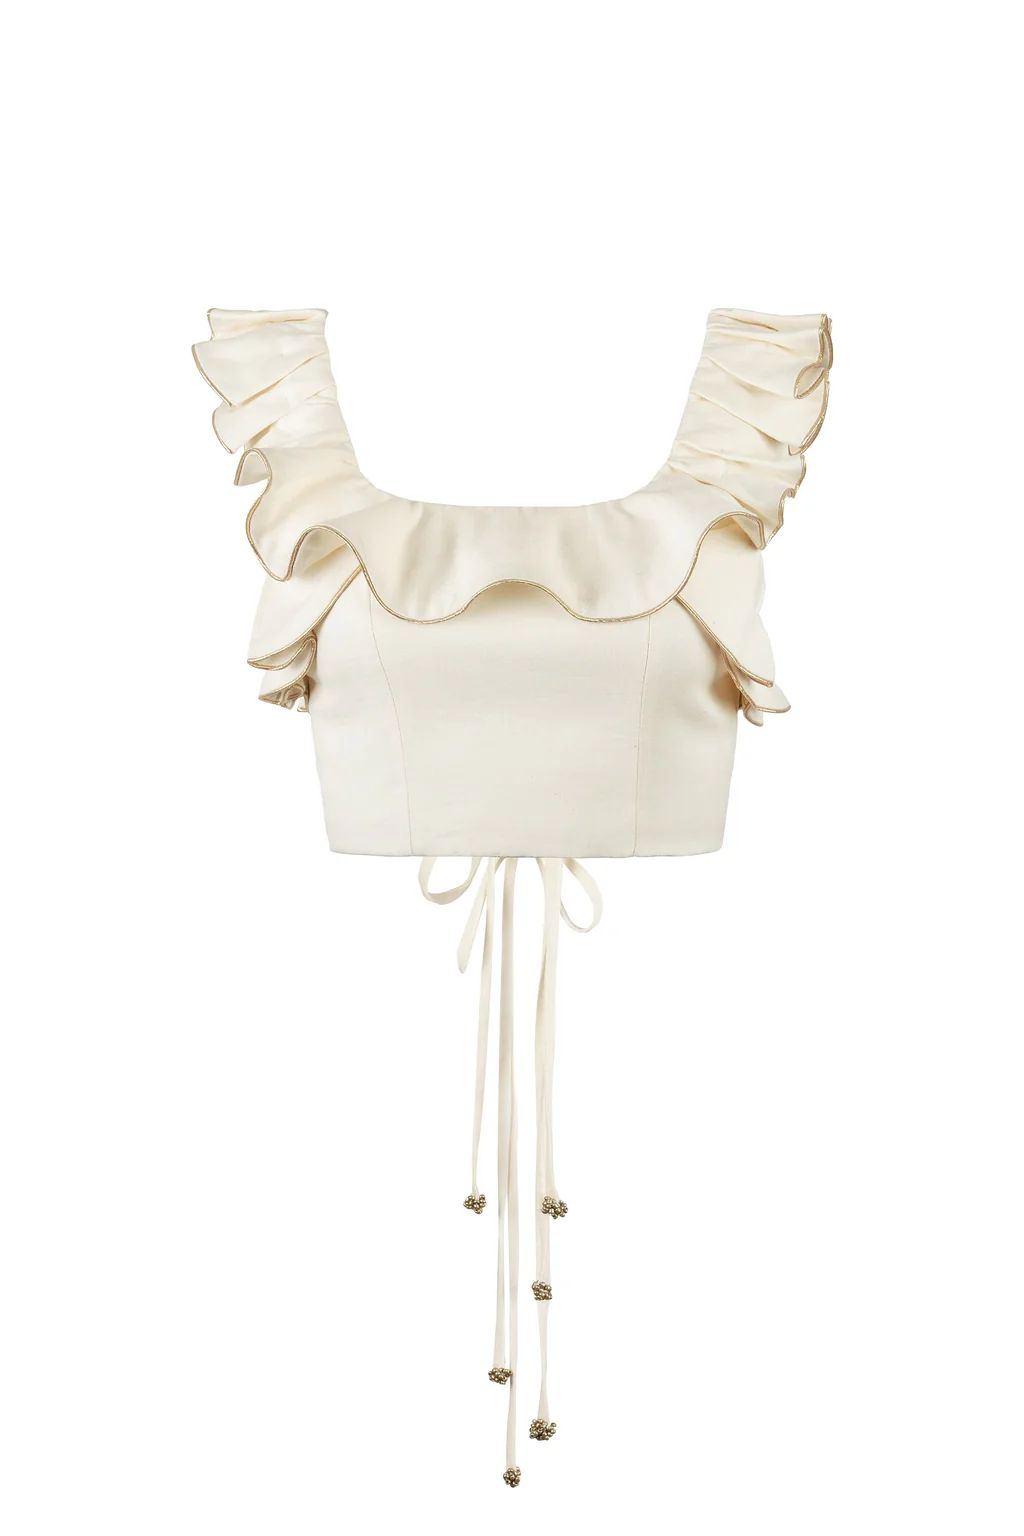 Malika Bustier Top -  Ivory | Rosewater Collective